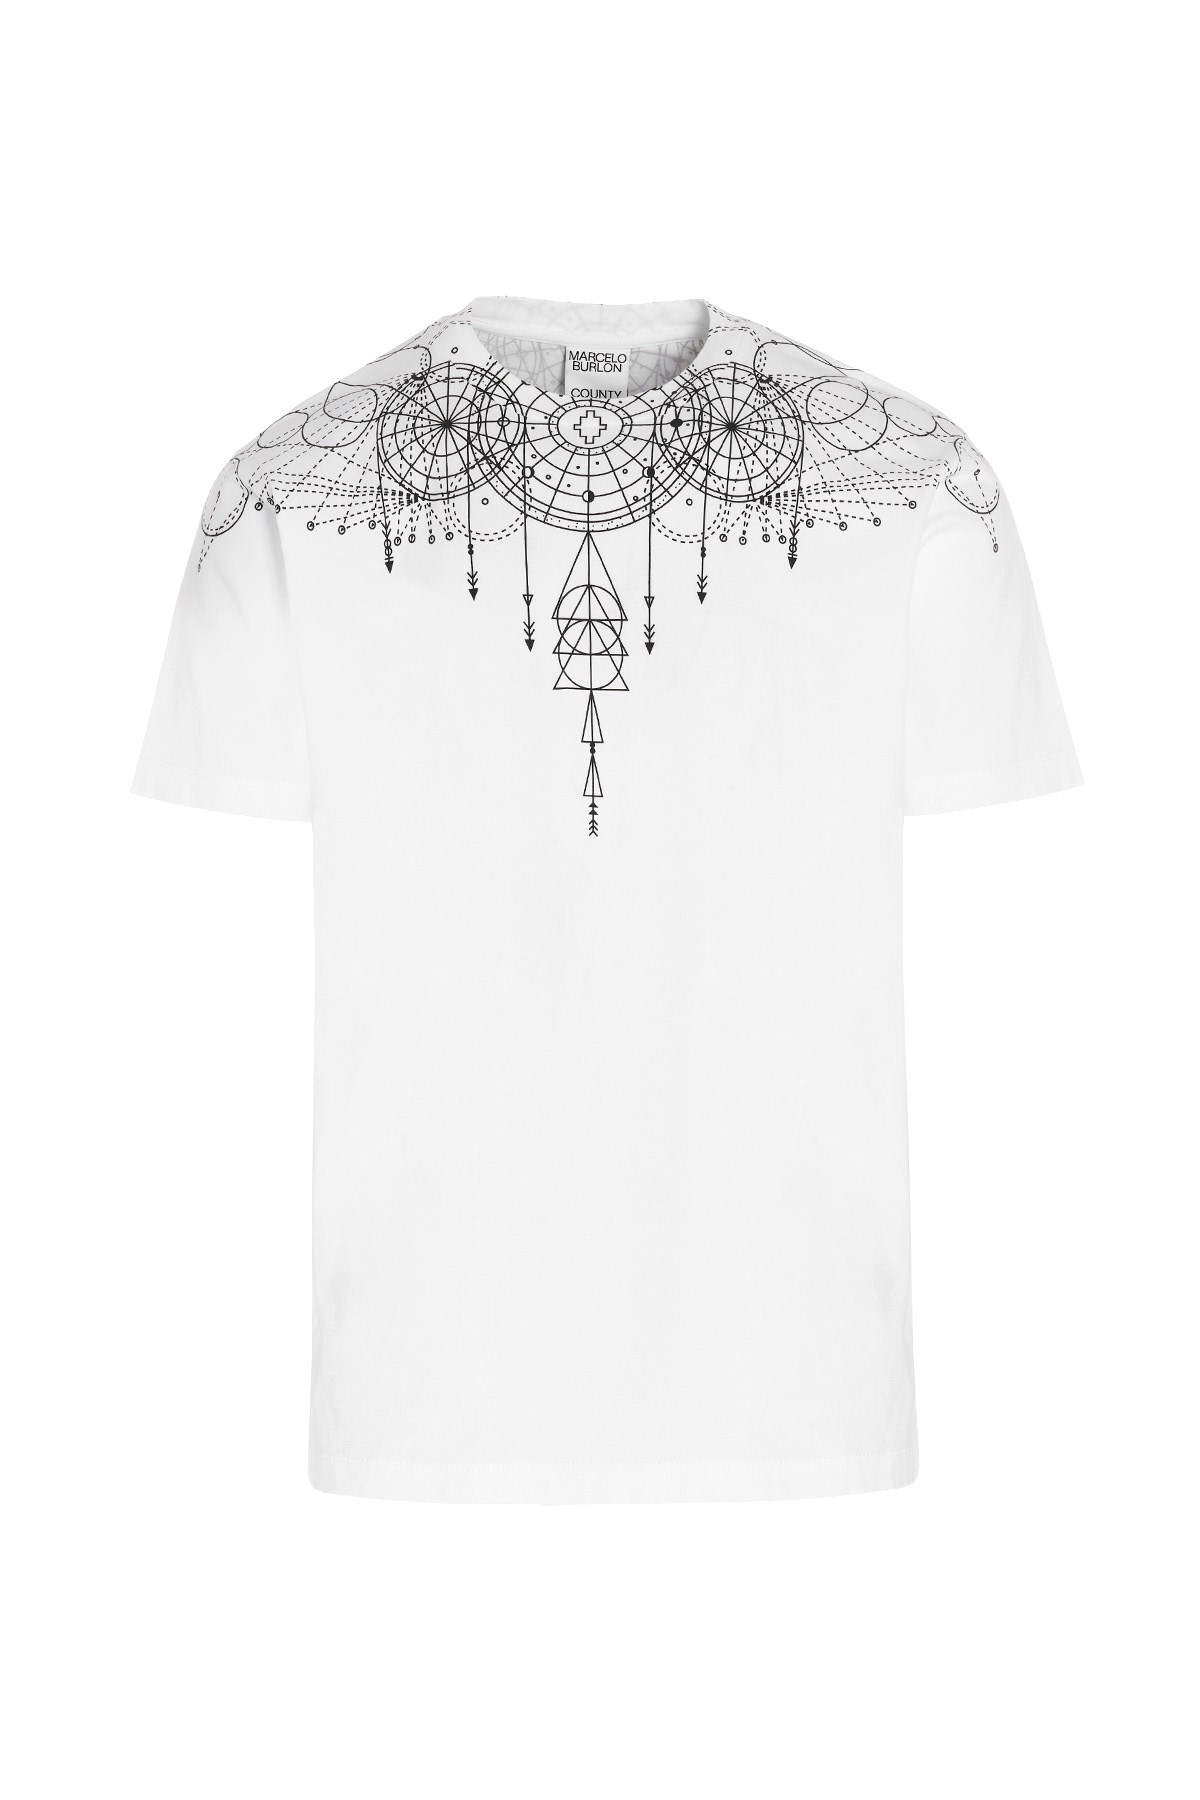 MARCELO BURLON - COUNTY OF MILAN ‘Astral Wings’ T-Shirt